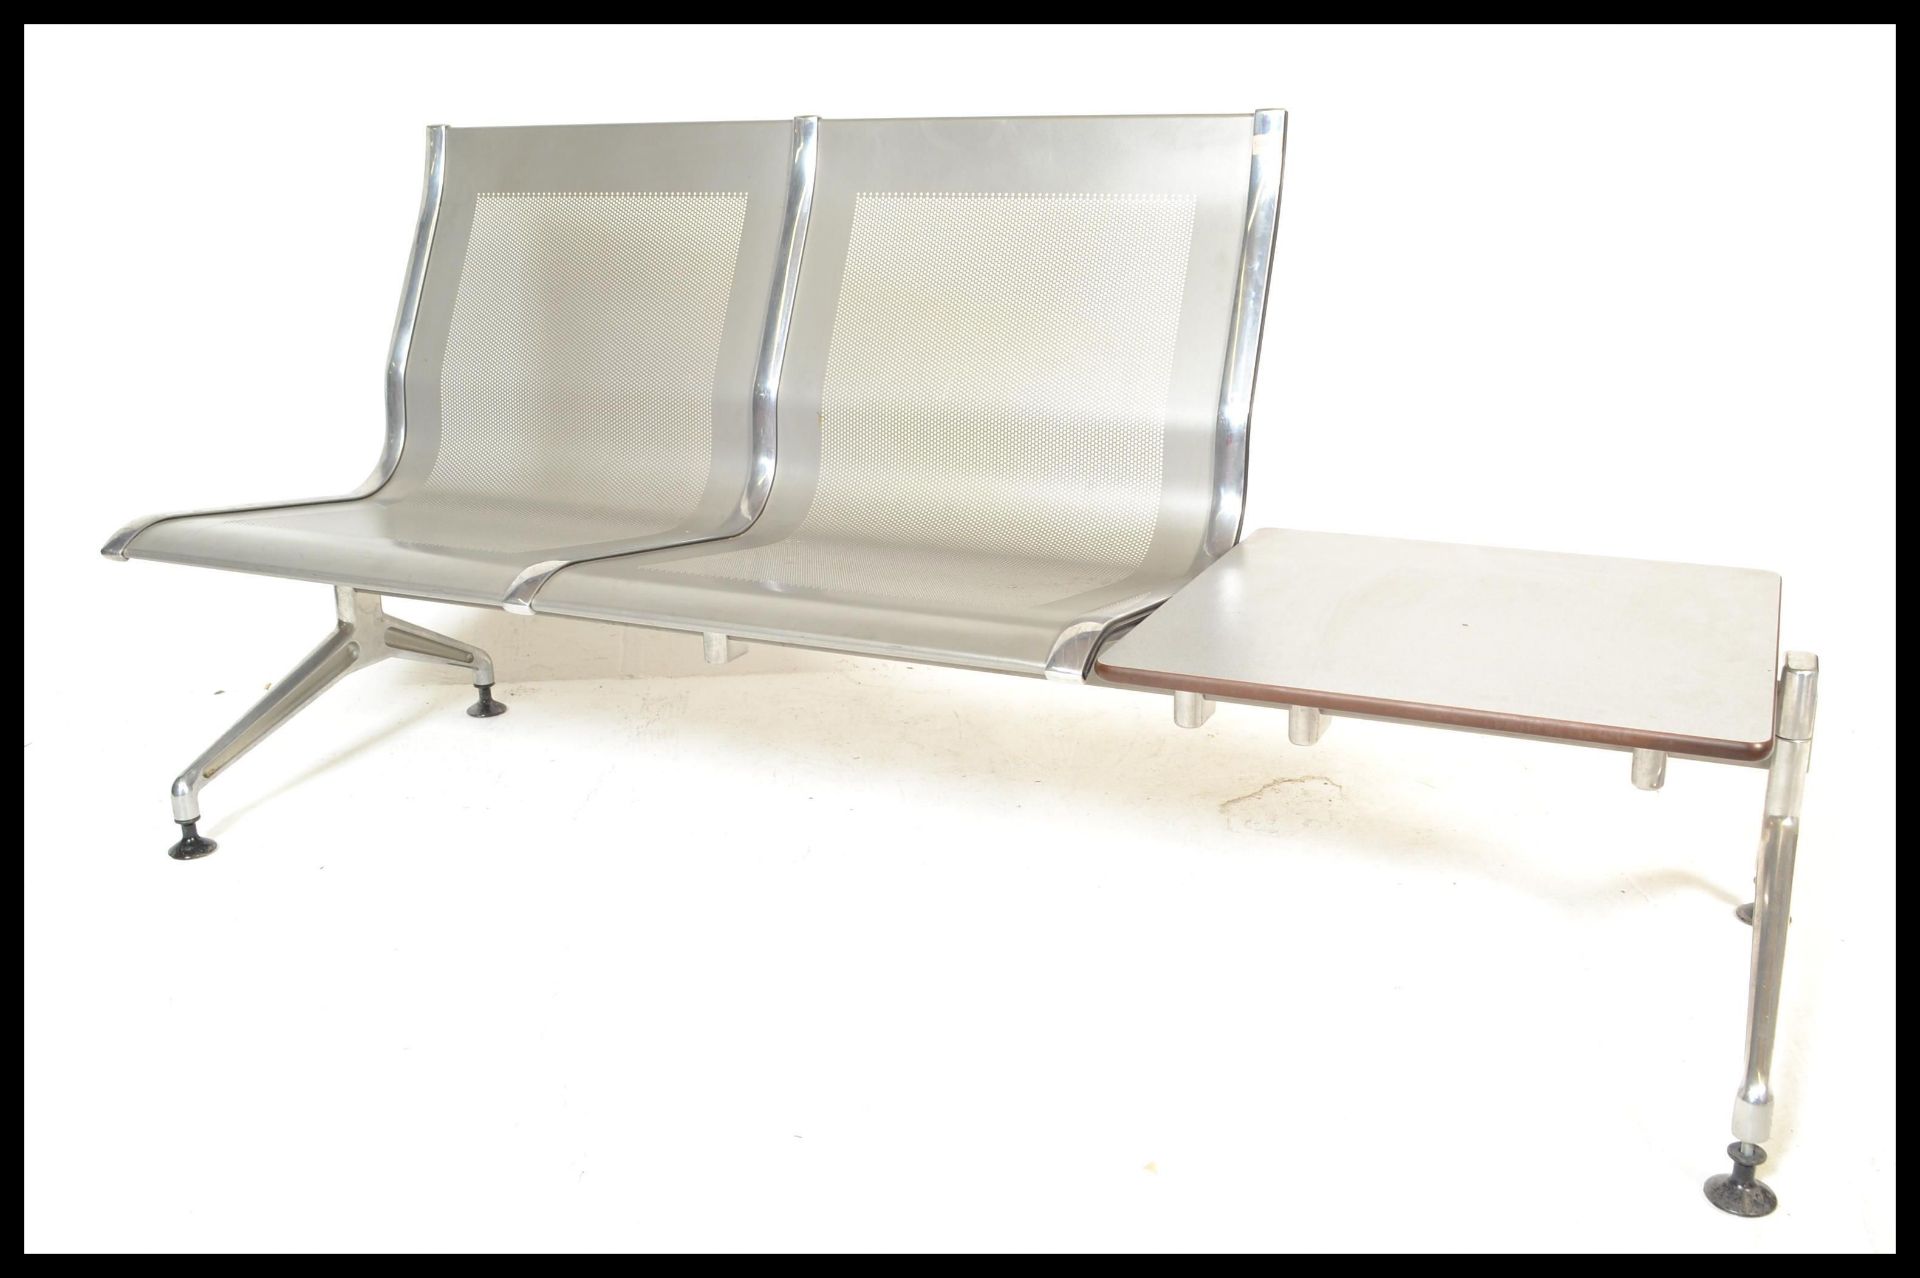 A vintage twin seat and side table airport seating set designed by Danish designer Prof Jorgen